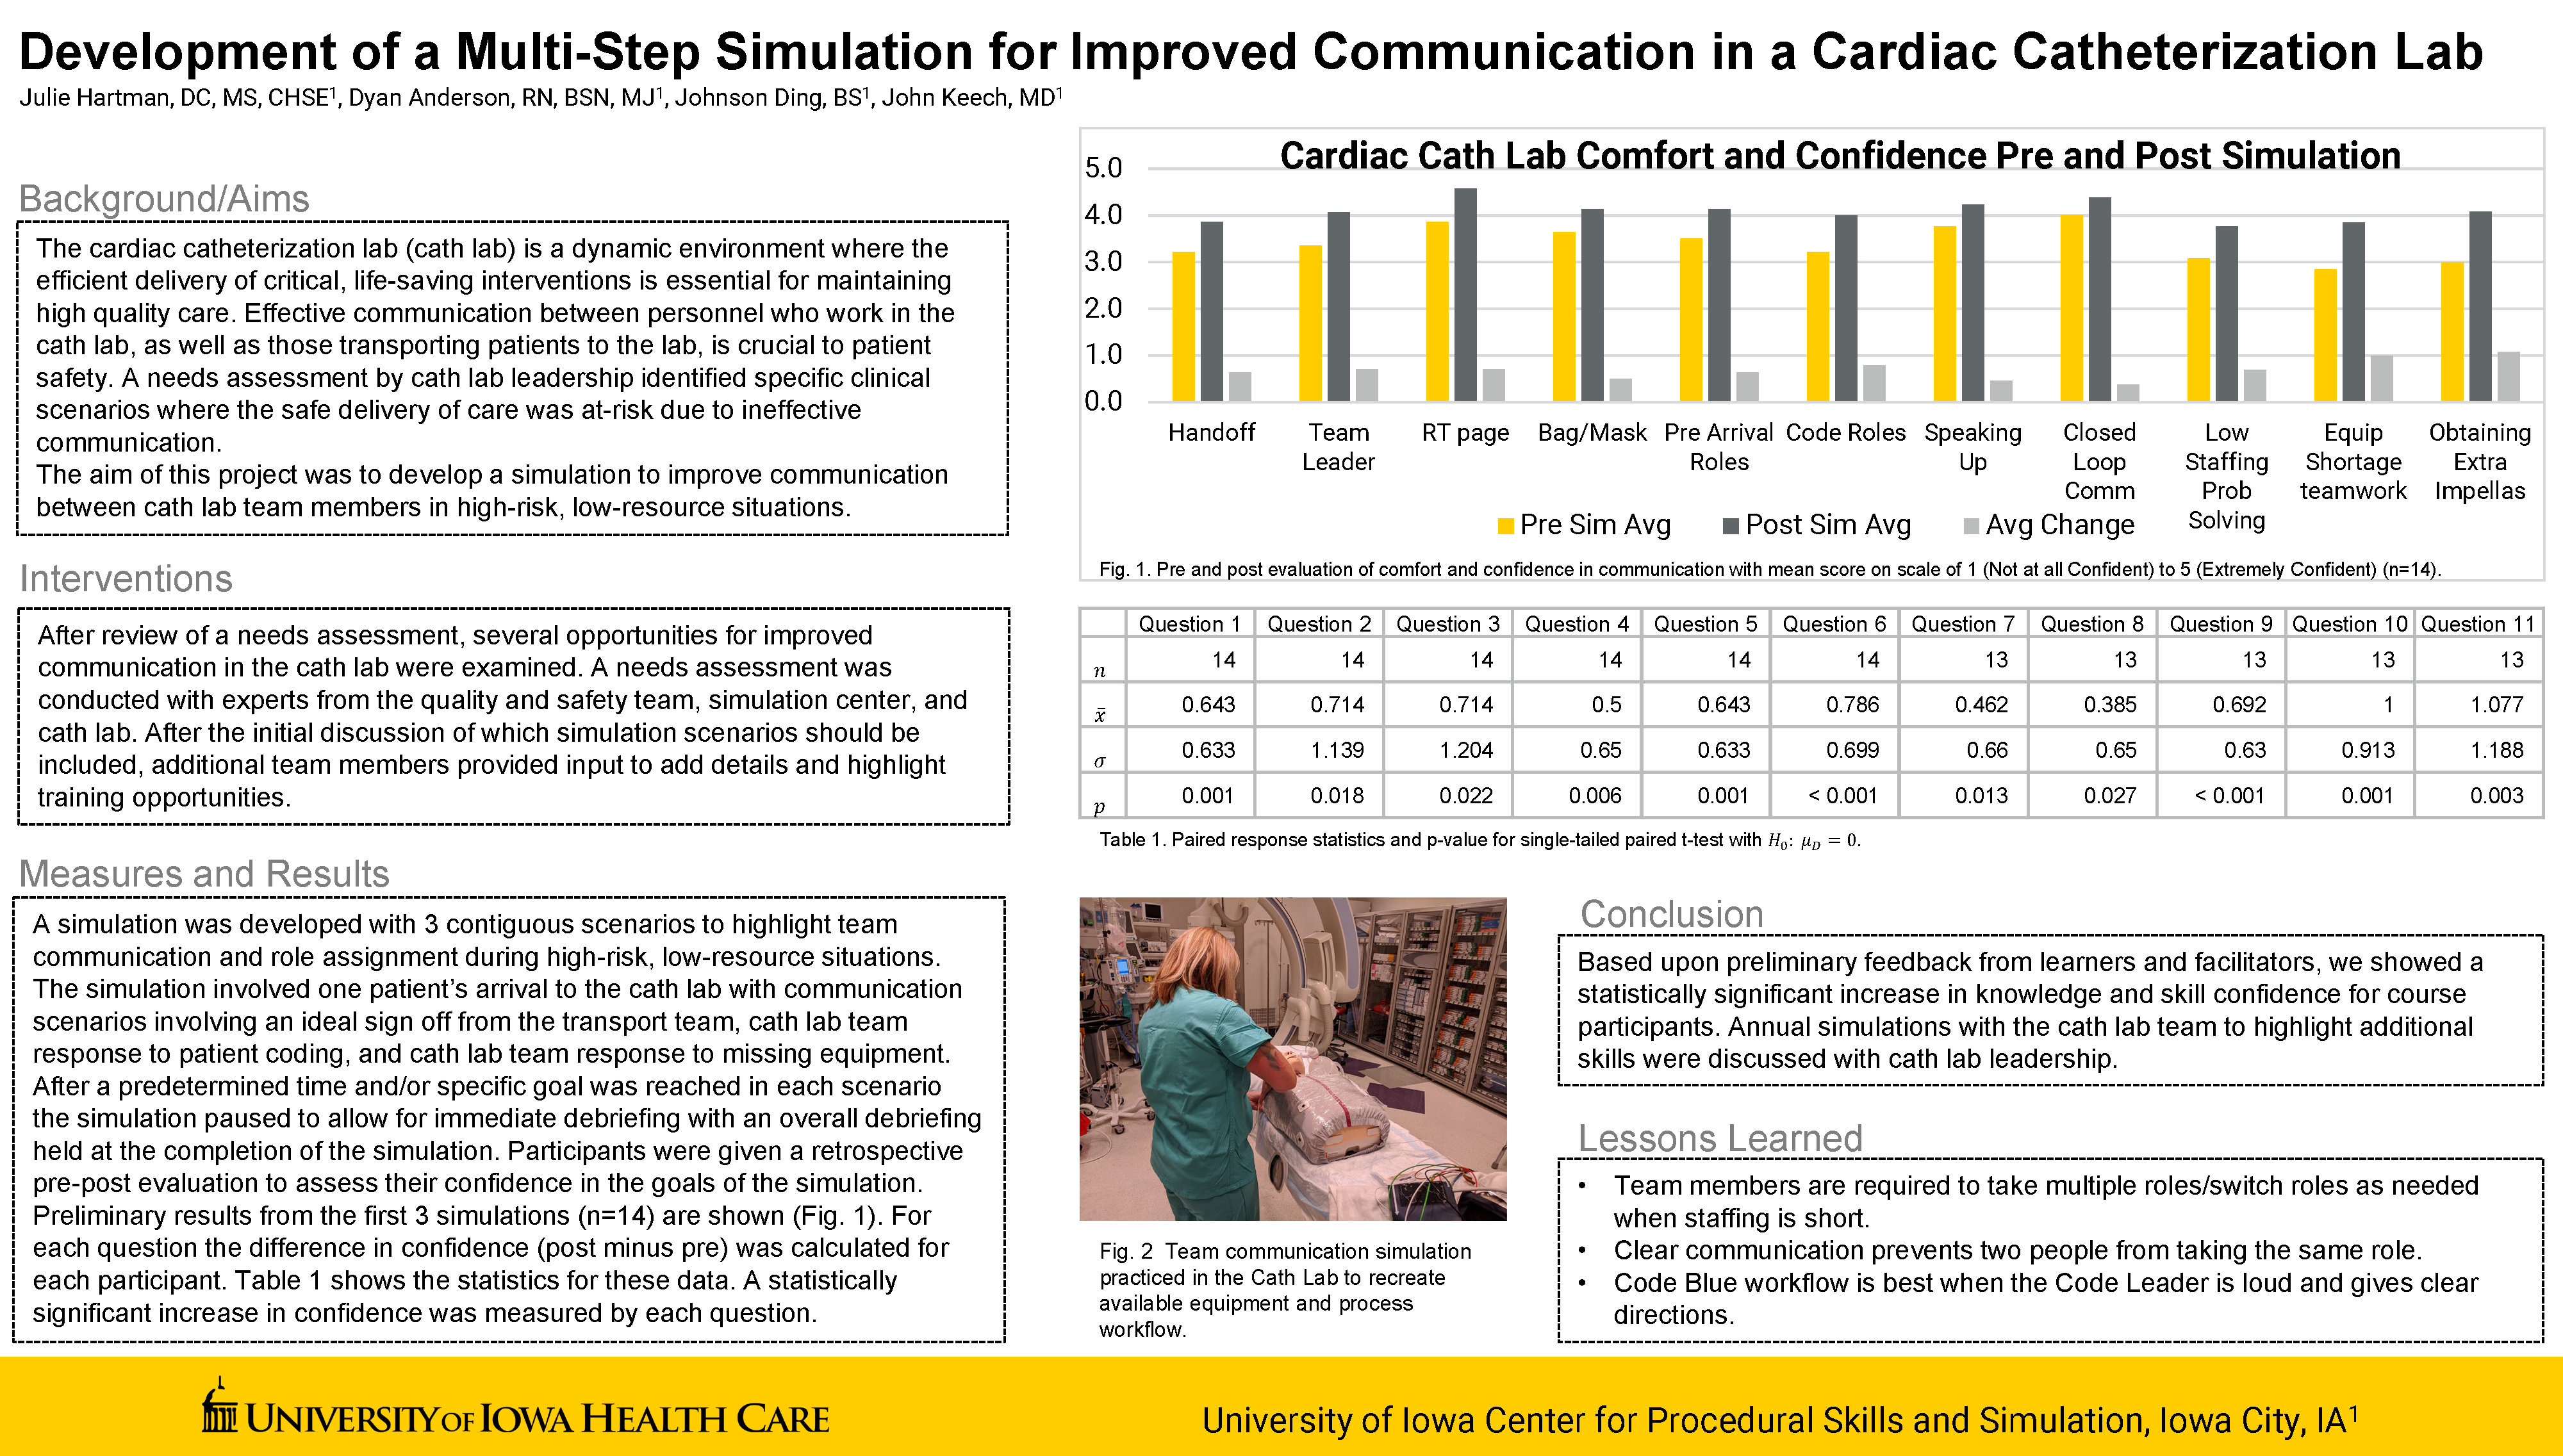 Development of a Multi-Step Simulation for Improved Communication in a Cardiac Catheterization Lab